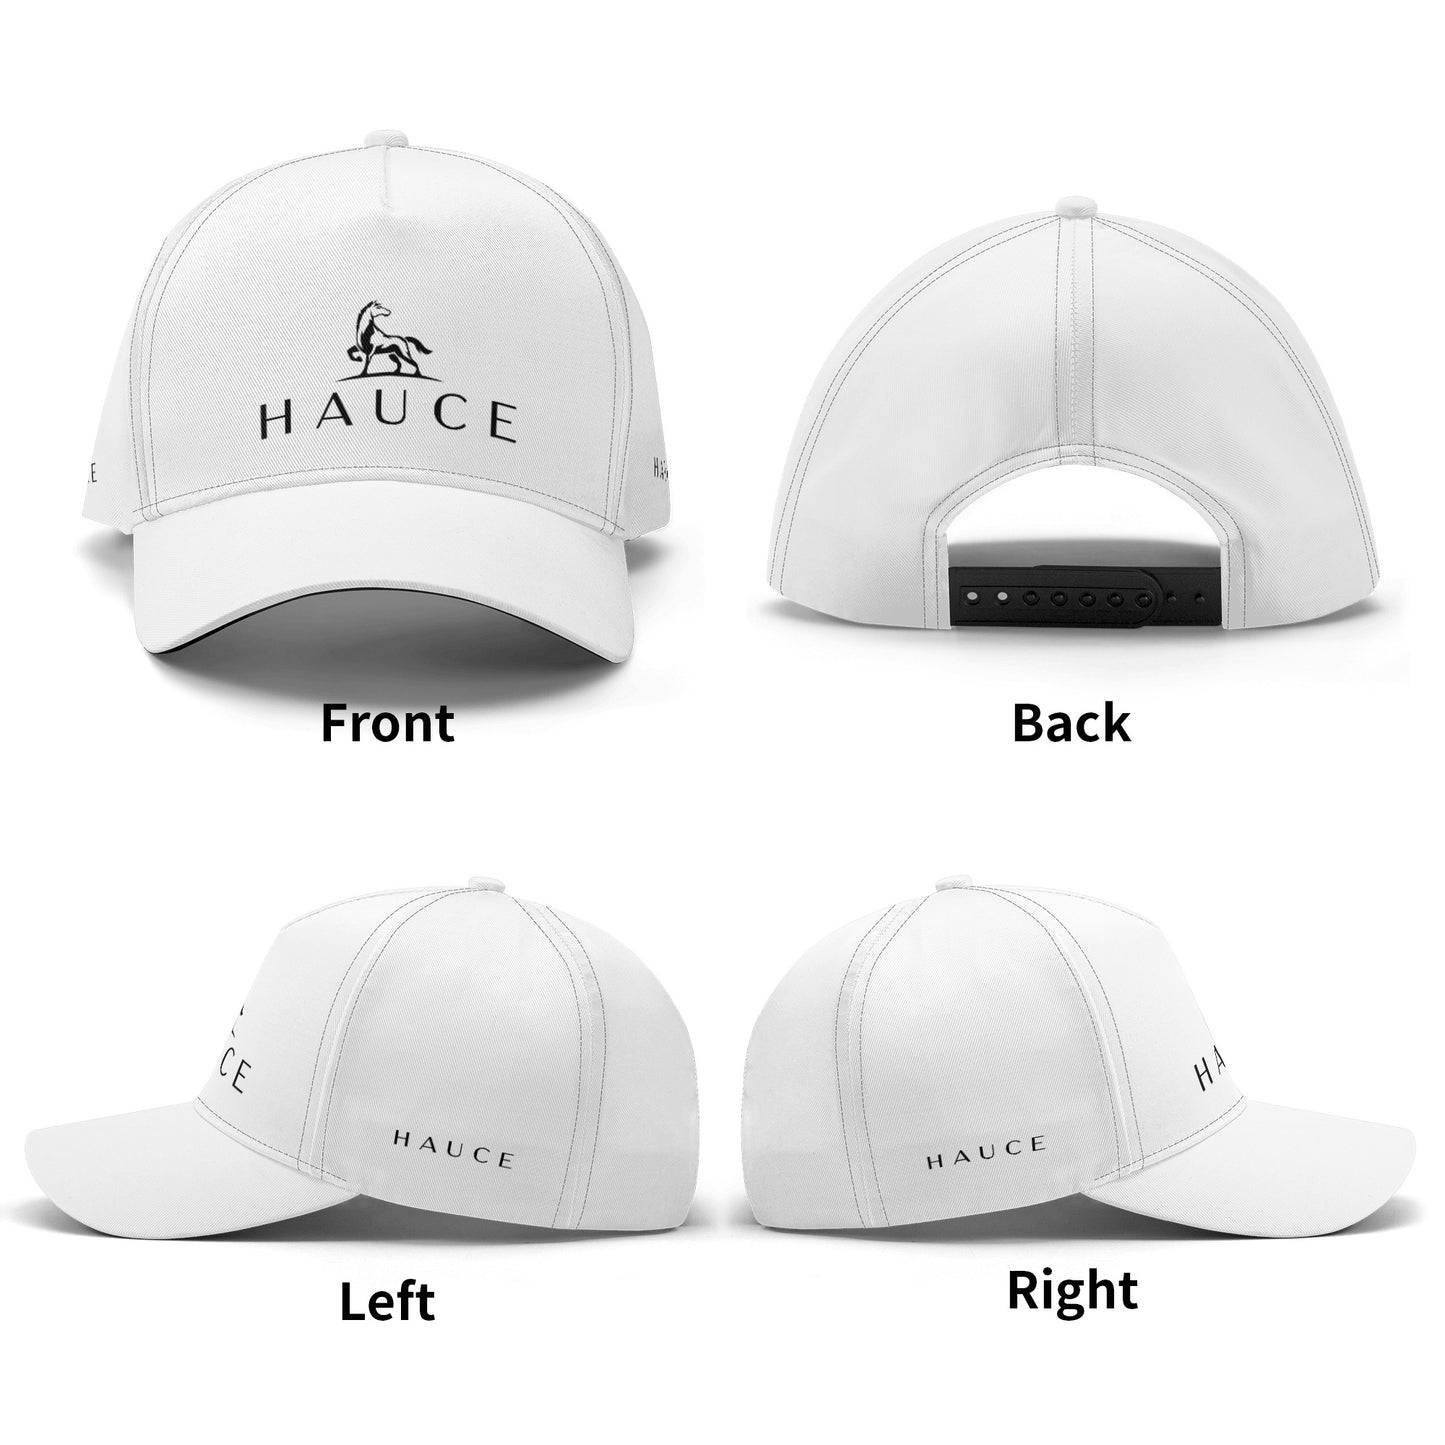 HAUCE (by SidelineSeries) casual cap